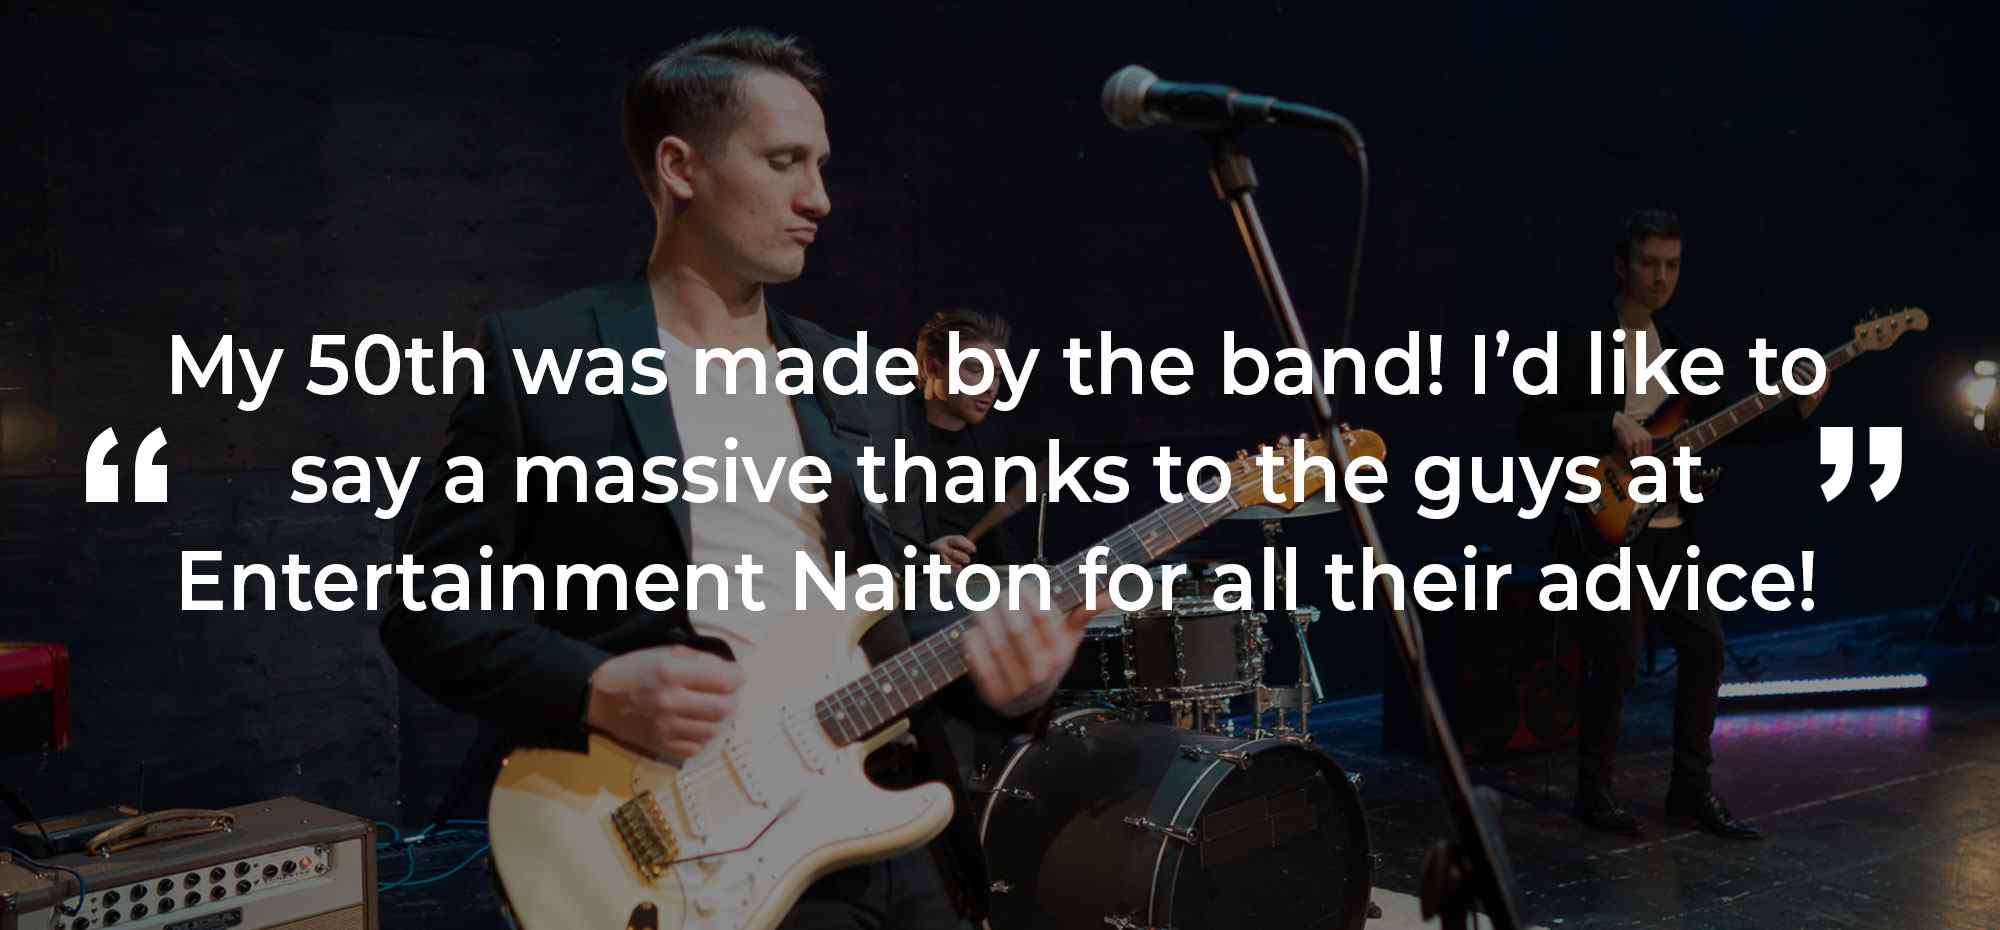 Client Review of a Party Band West Yorkshire